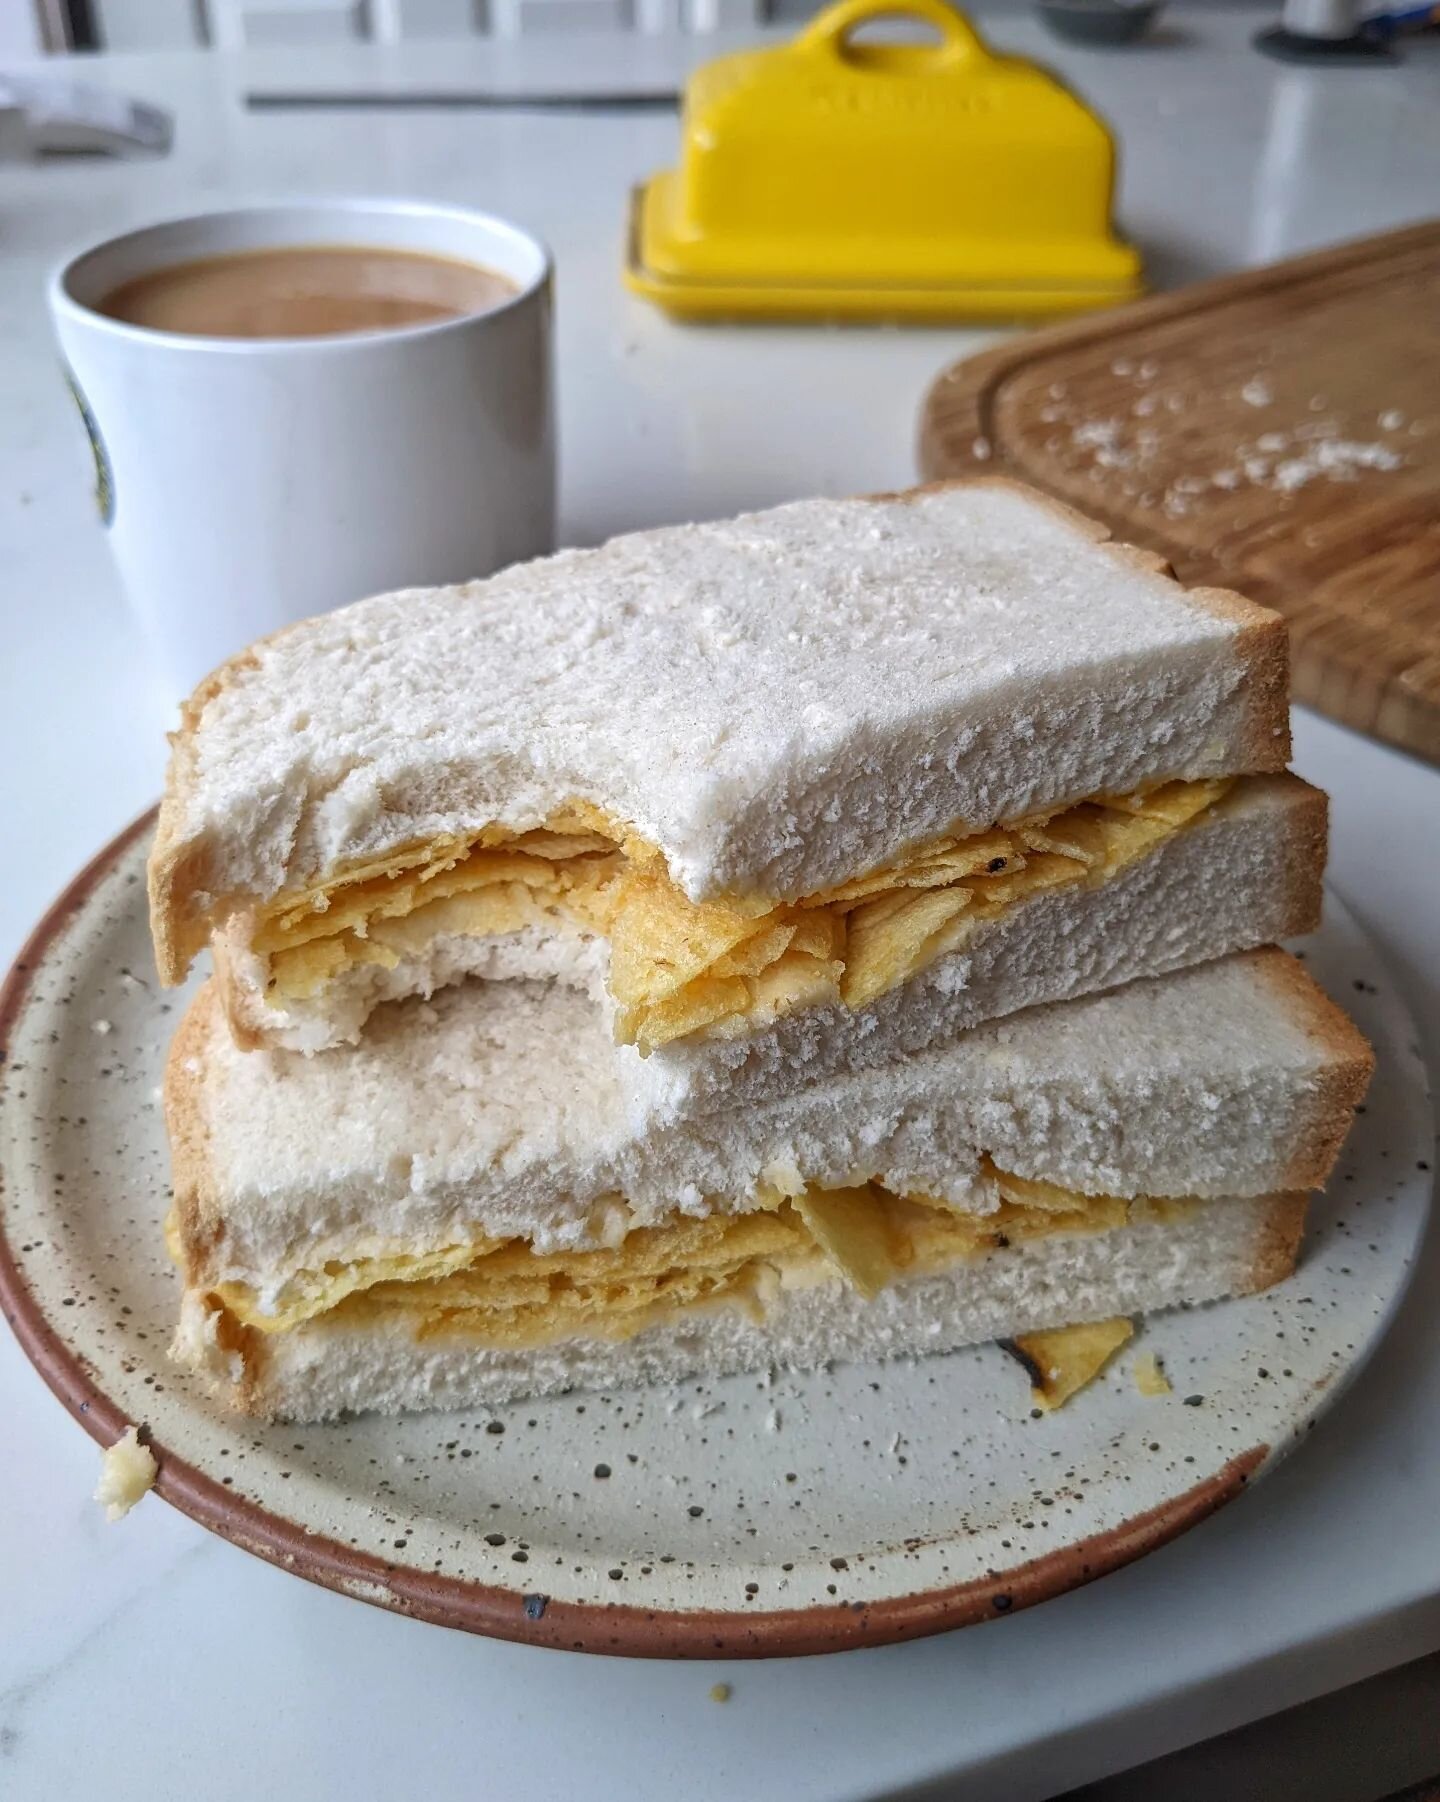 The crisp sandwich. In @pitmagazineuk's potato edition, available to pre-order now.
My heart sings when I get to write about the more frivolous things in life. Not that crisp sandwiches are frivolous - they're not, they are very, very important. Pre-